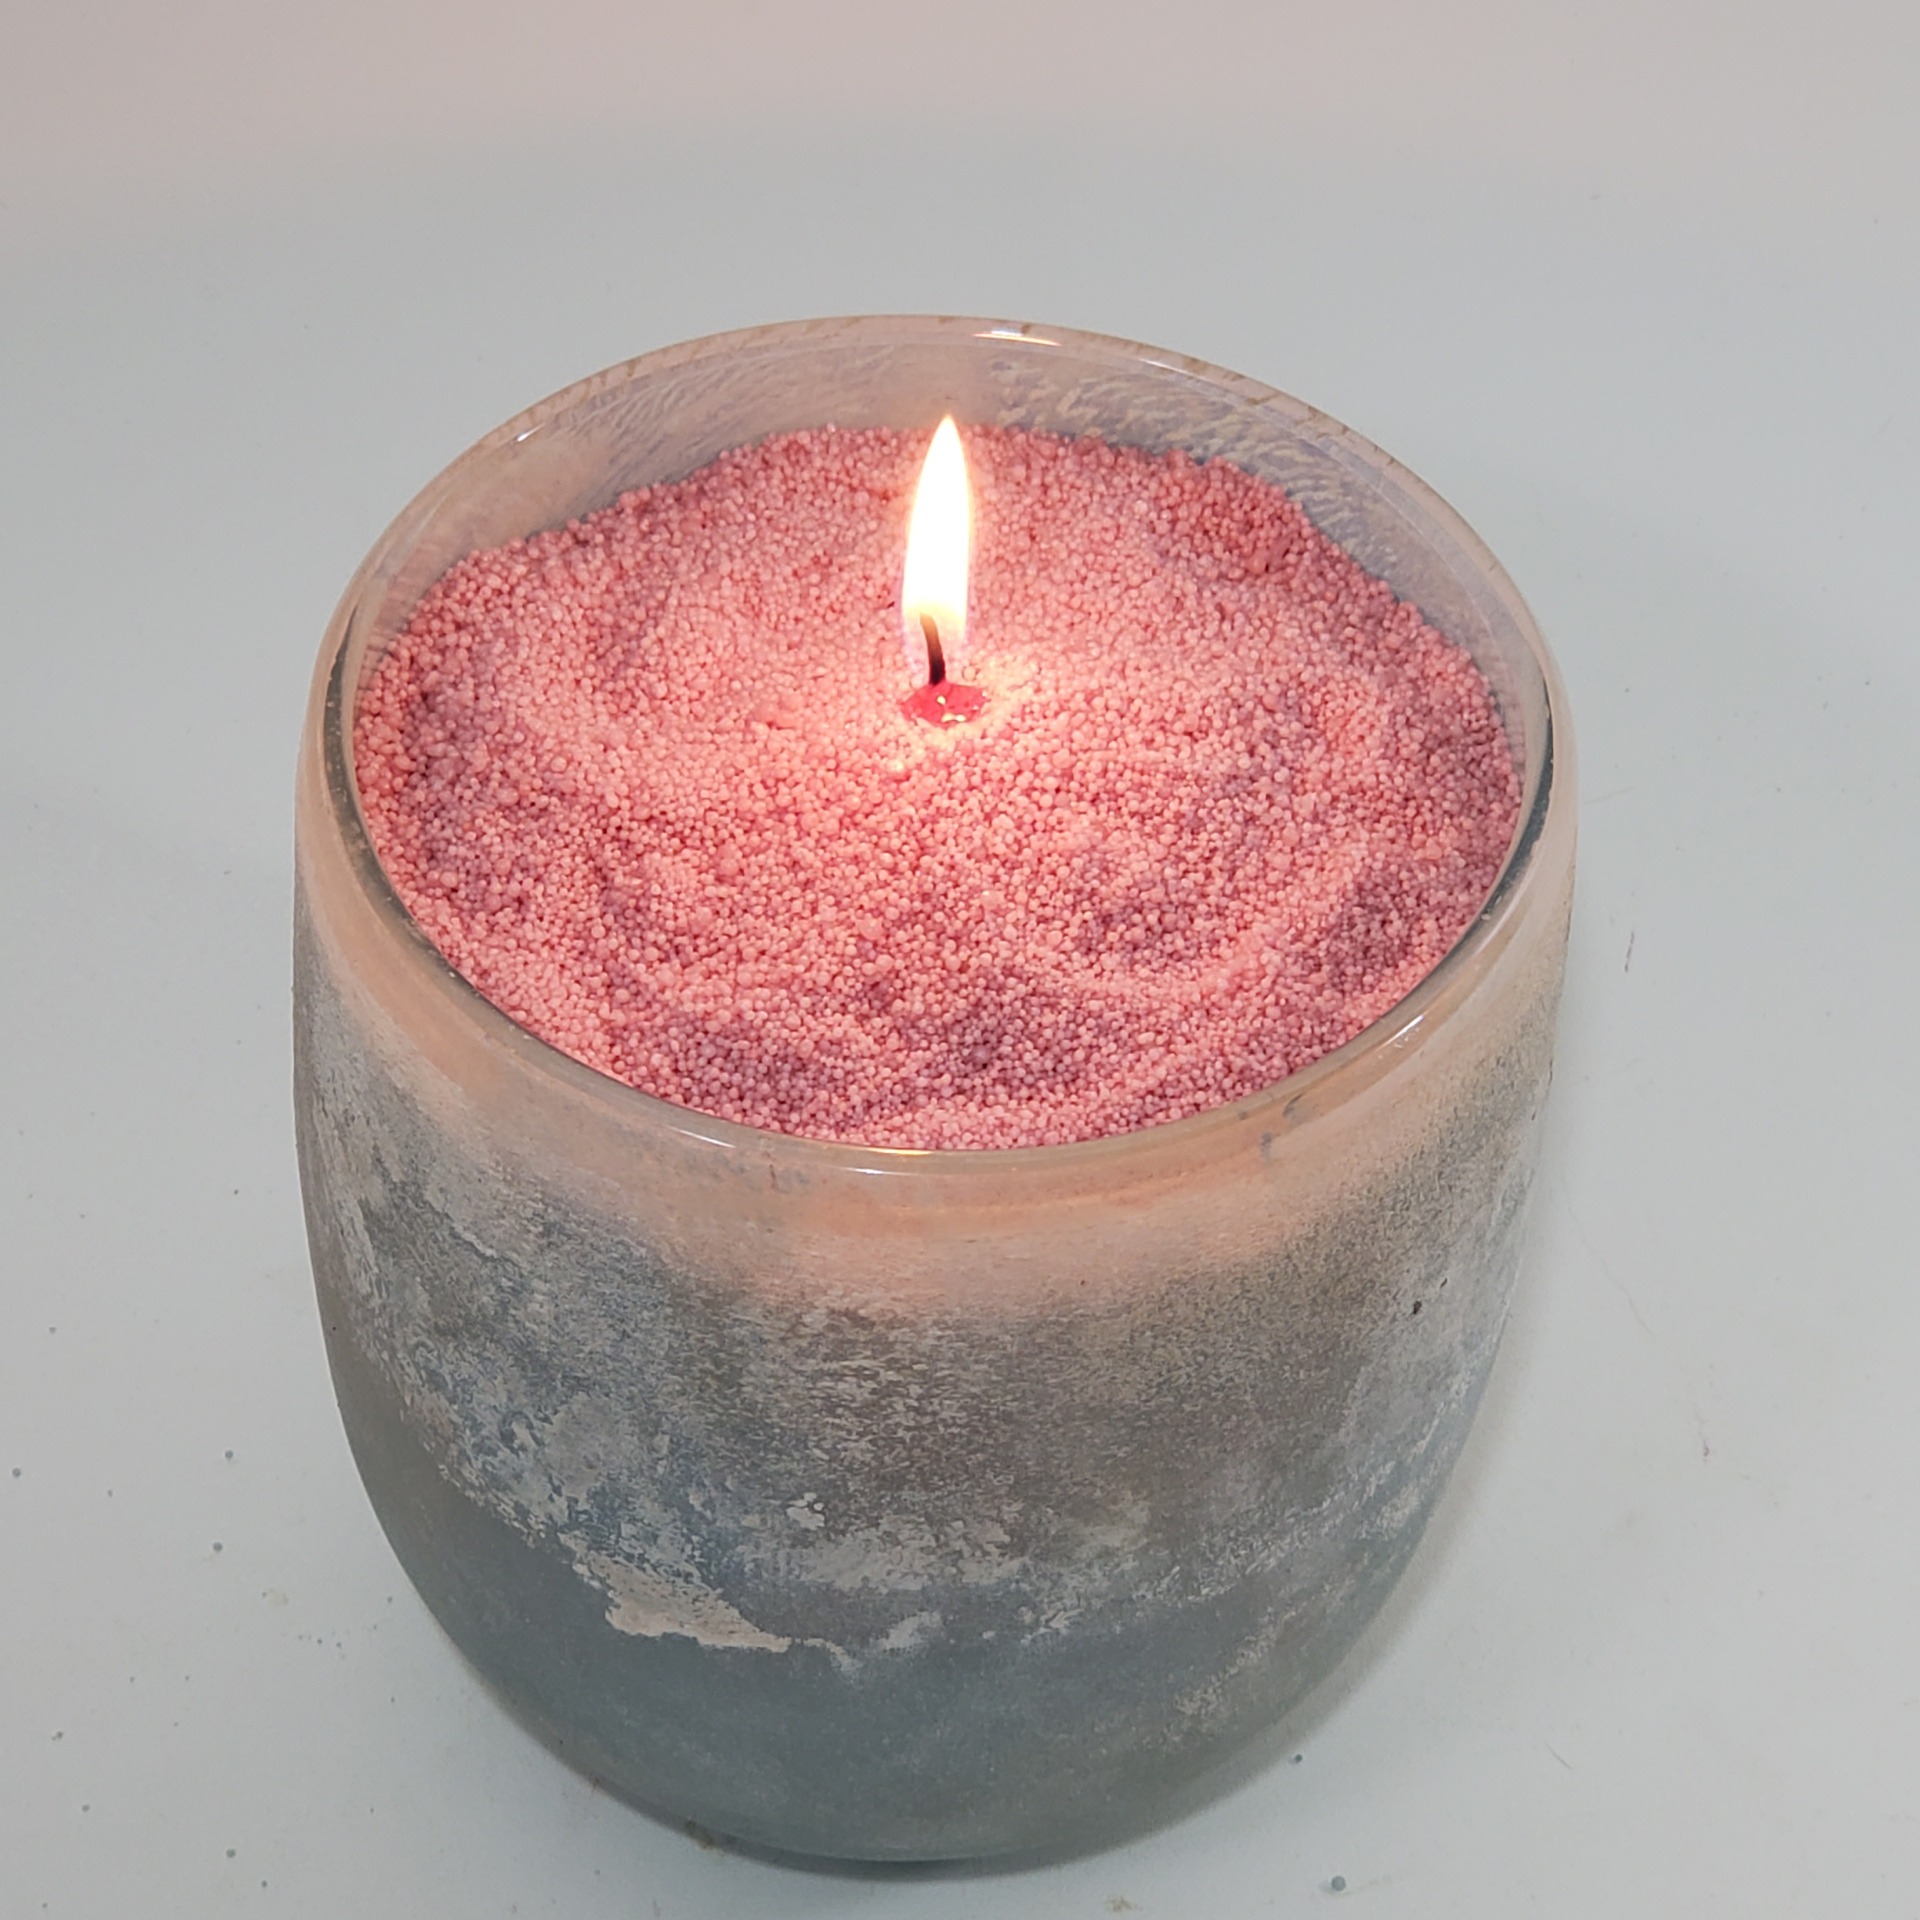 Repurposed Frosted glass filled with Soft Pink Candle Sand - Wax for Candles